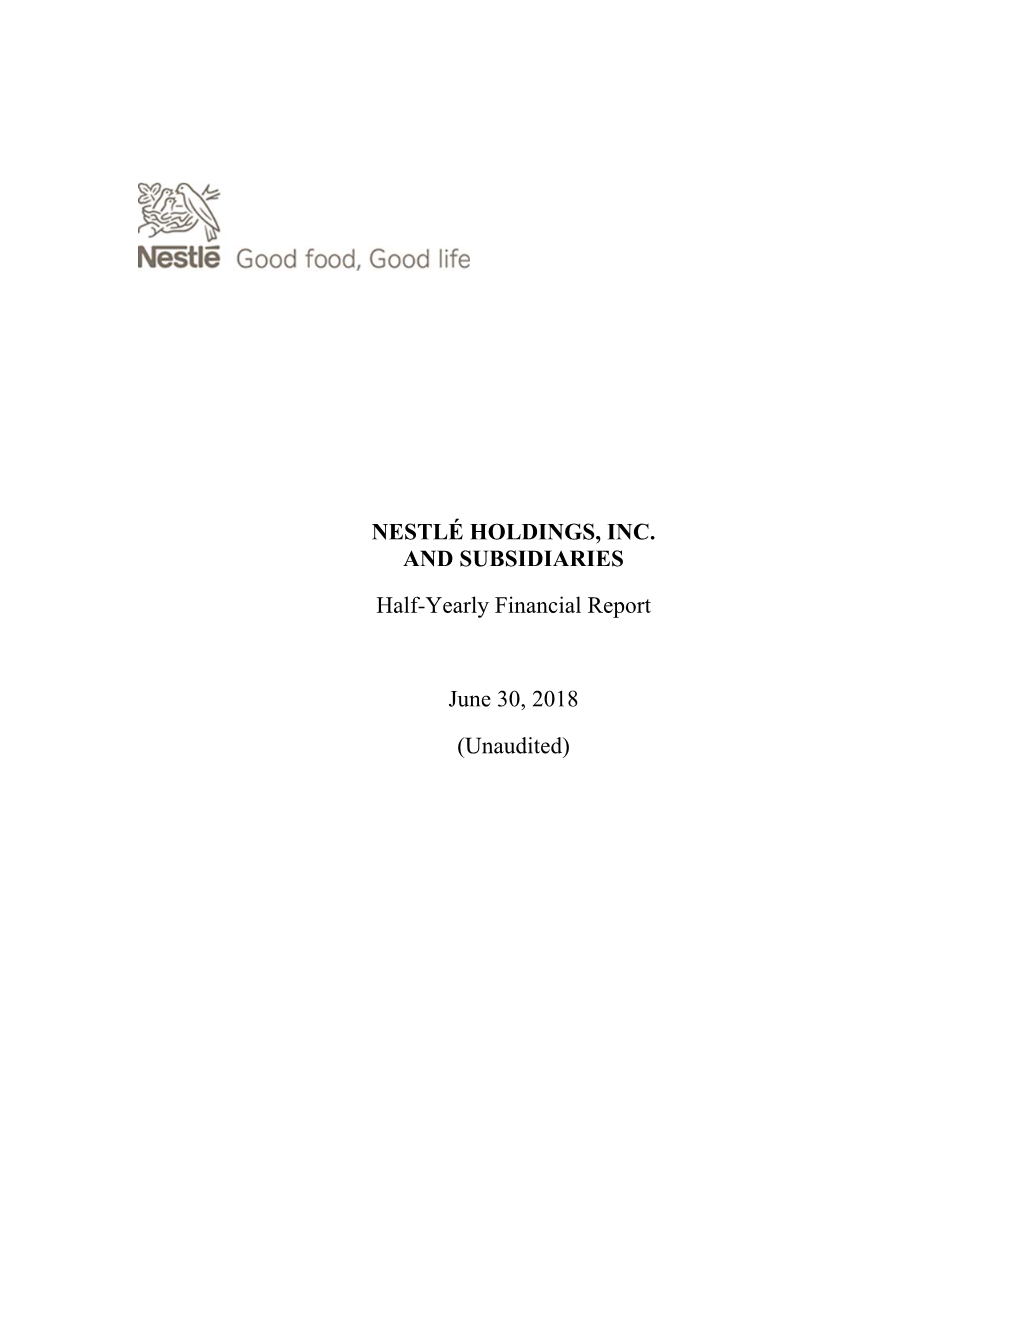 NESTLÉ HOLDINGS, INC. and SUBSIDIARIES Half-Yearly Financial Report